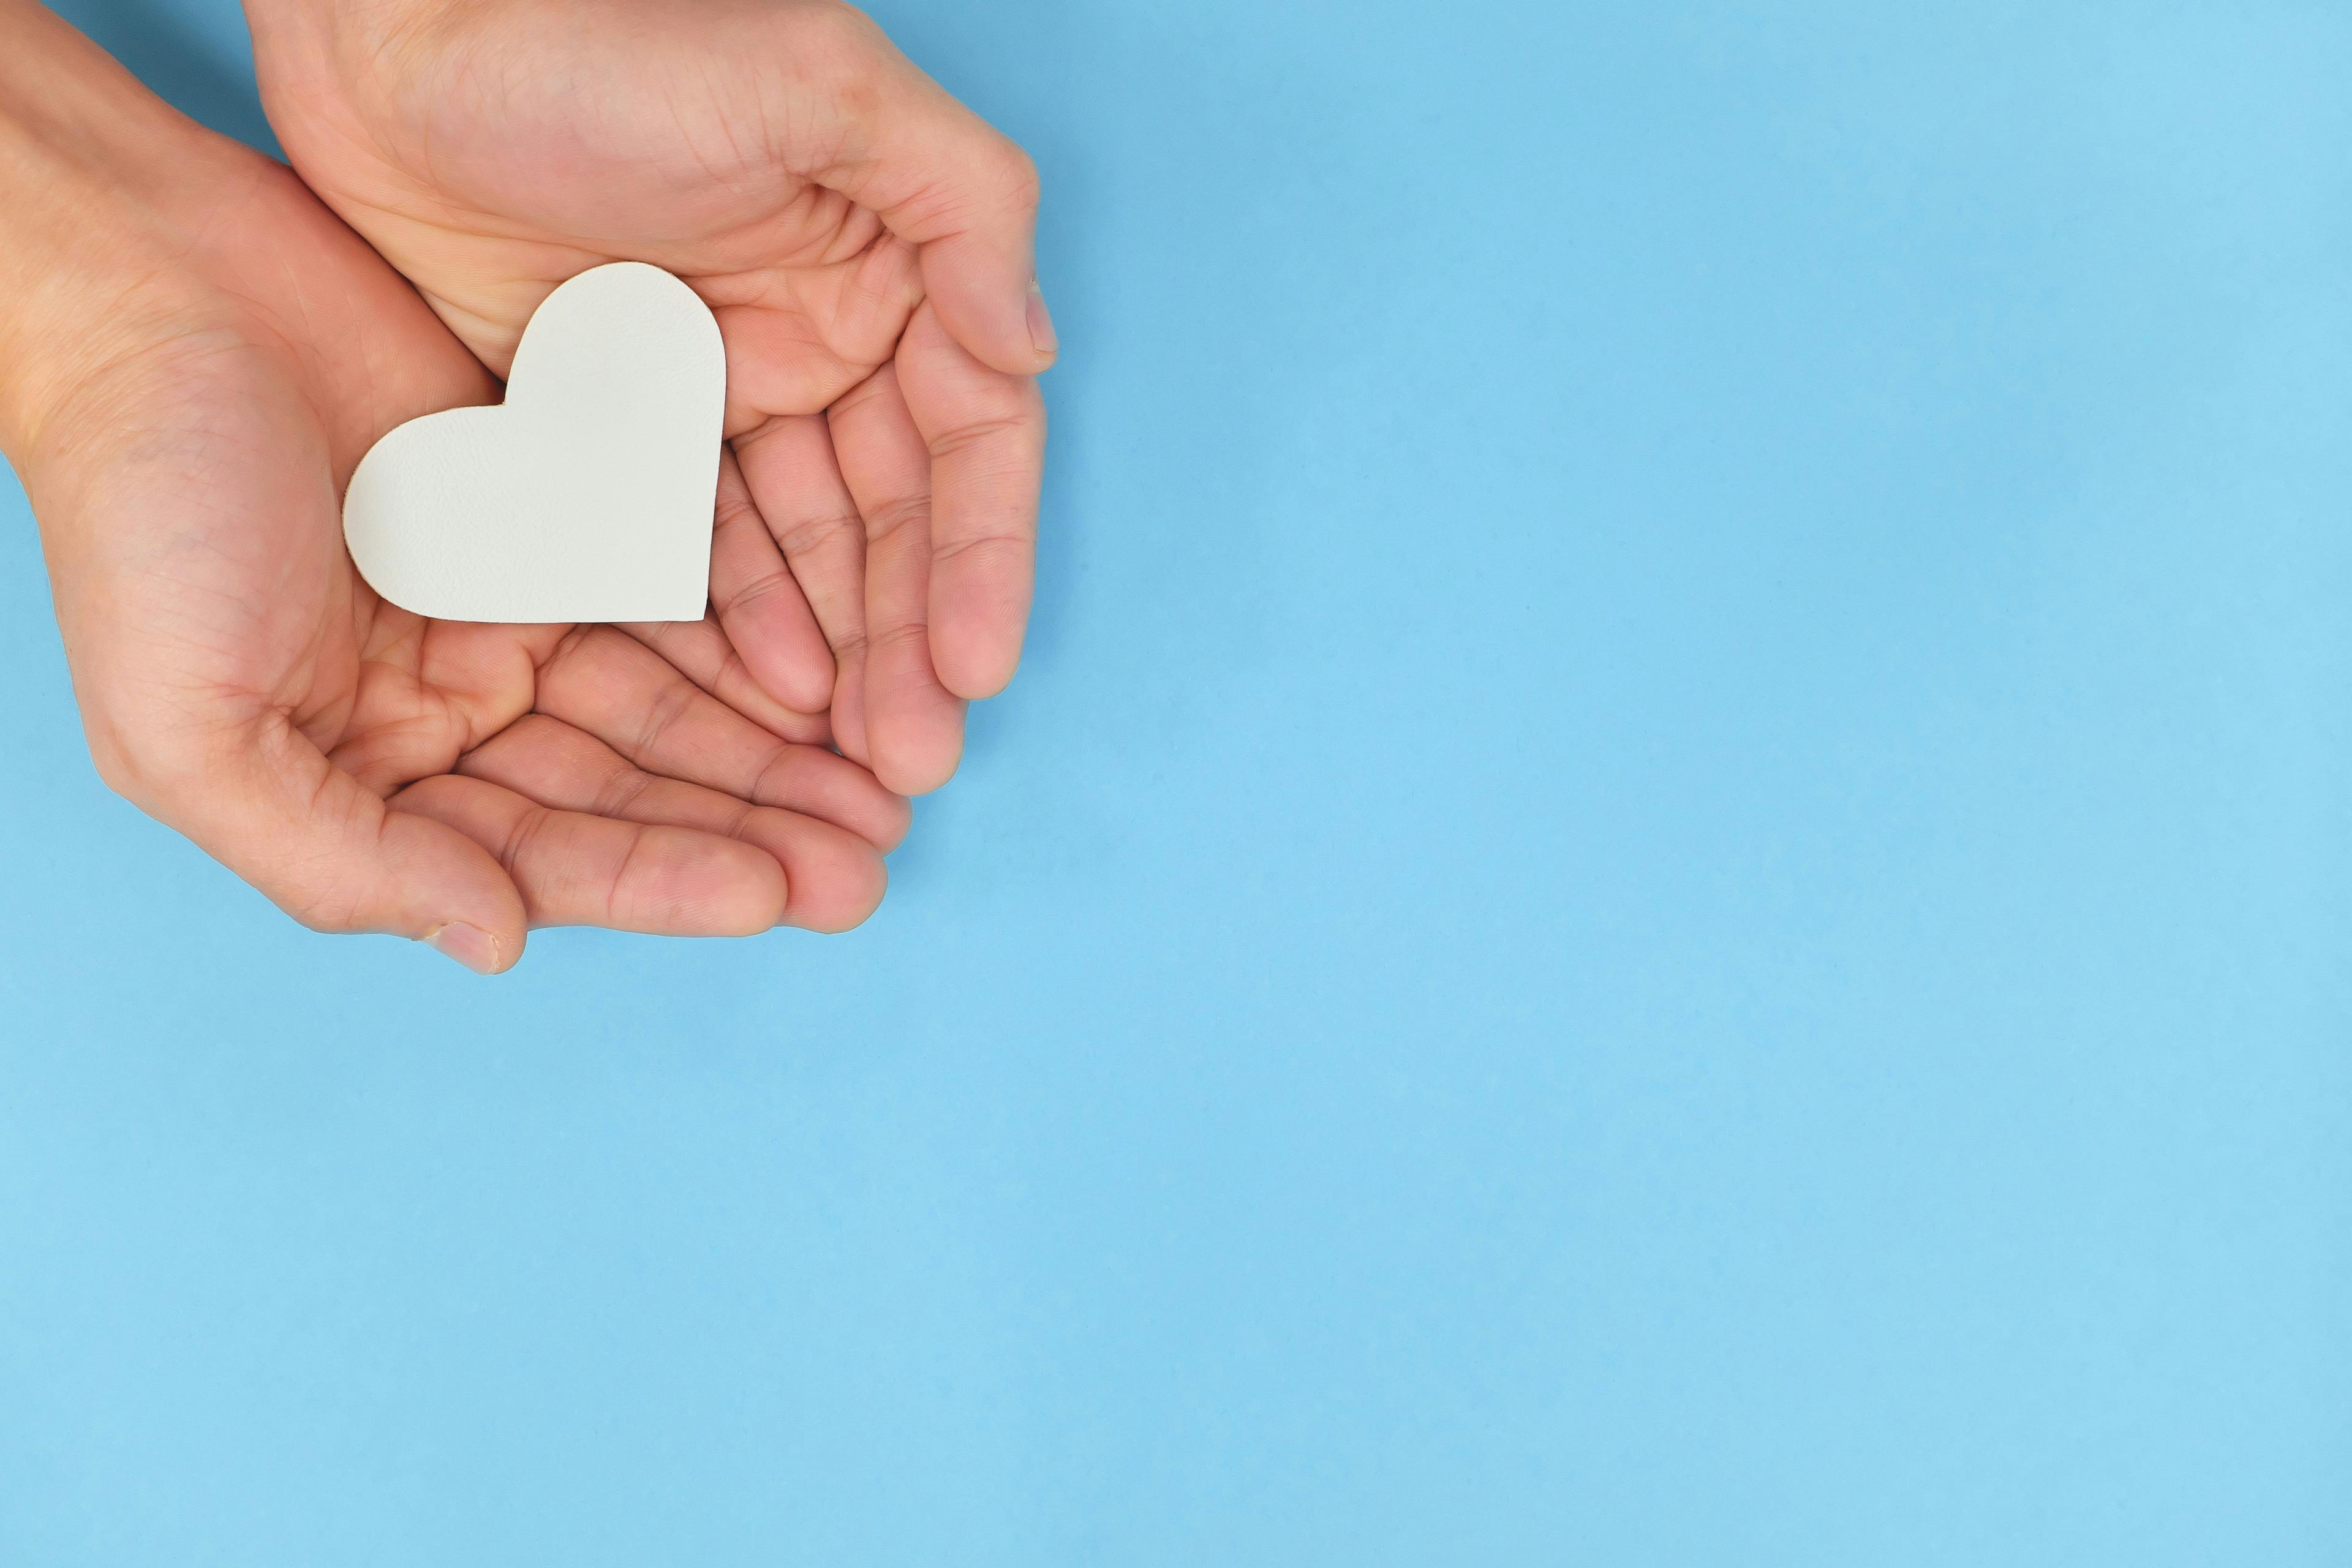 Hands holding a white heart in blue background. Charity, pure love and kindness concept. - stock.adobe.com